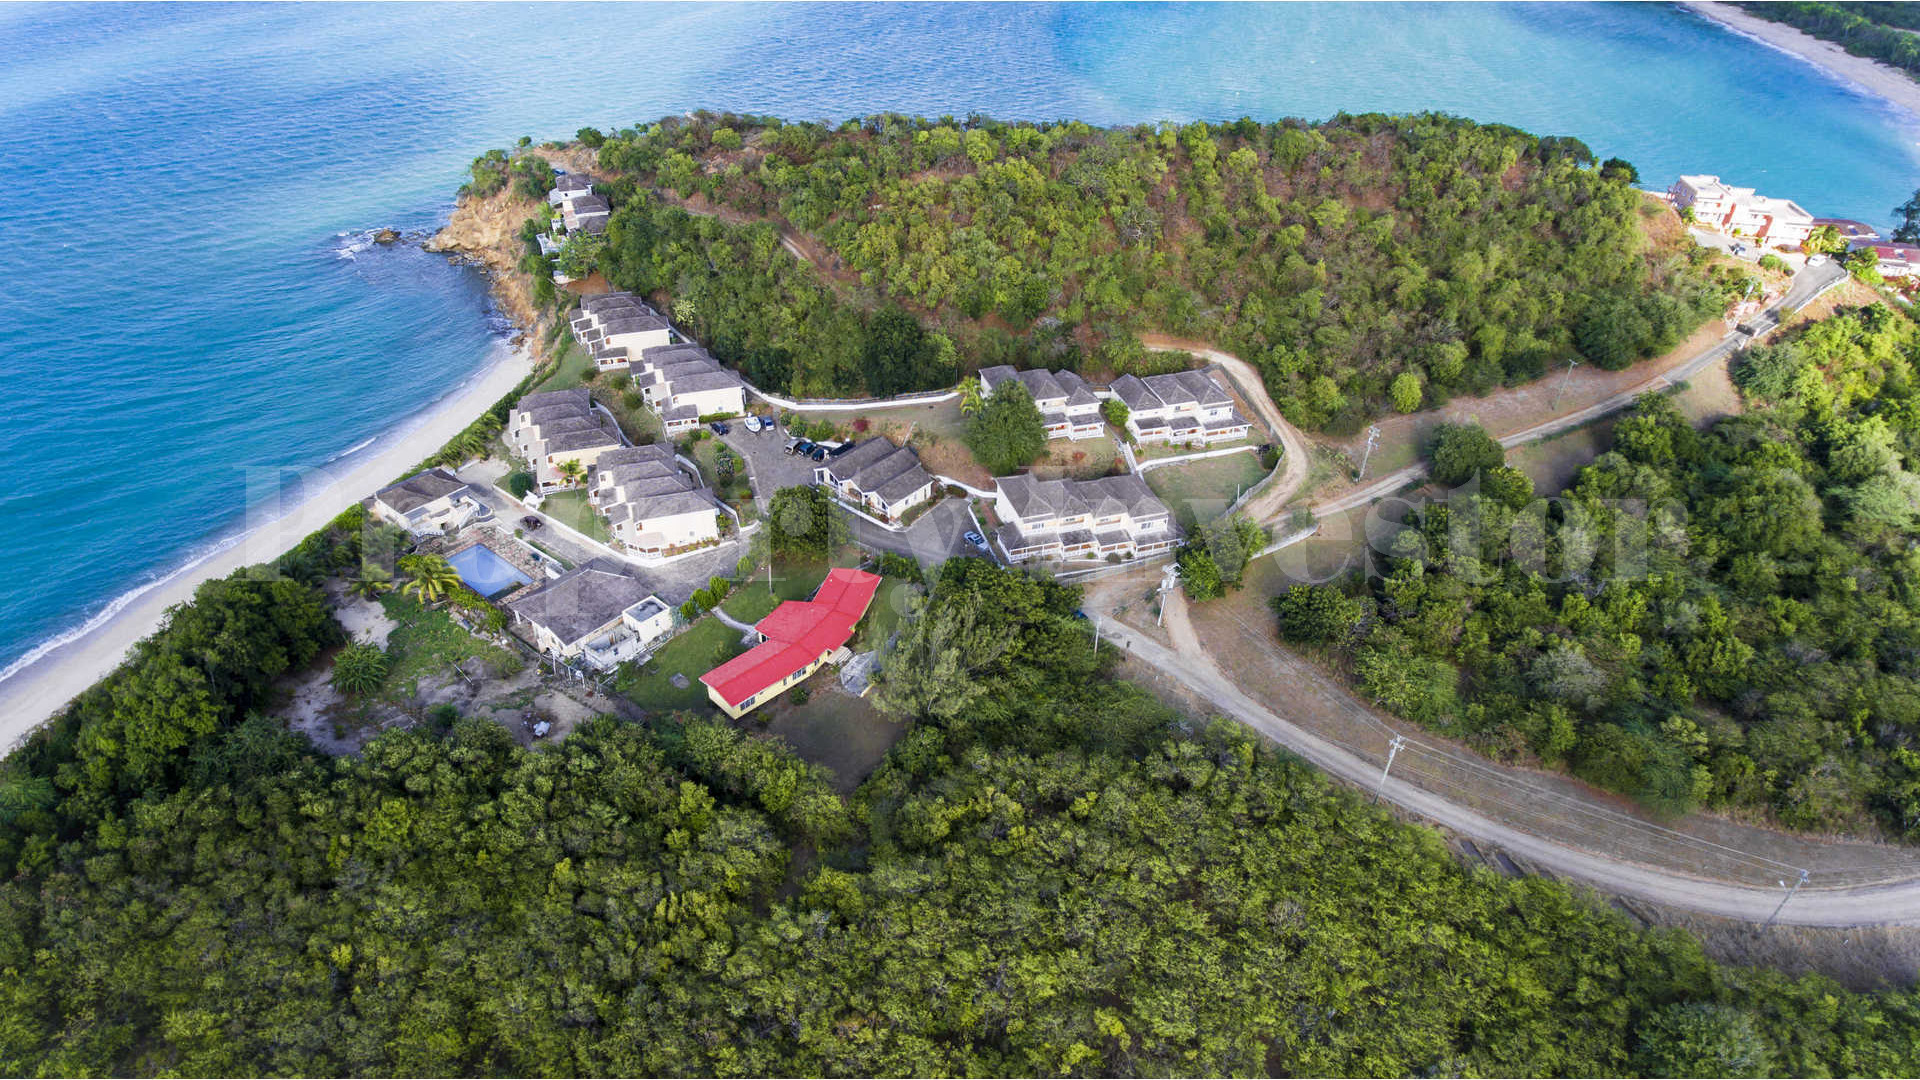 Spectacular 59 Bedroom Private Beach Resort for Sale at St. John's Harbour, Antigua